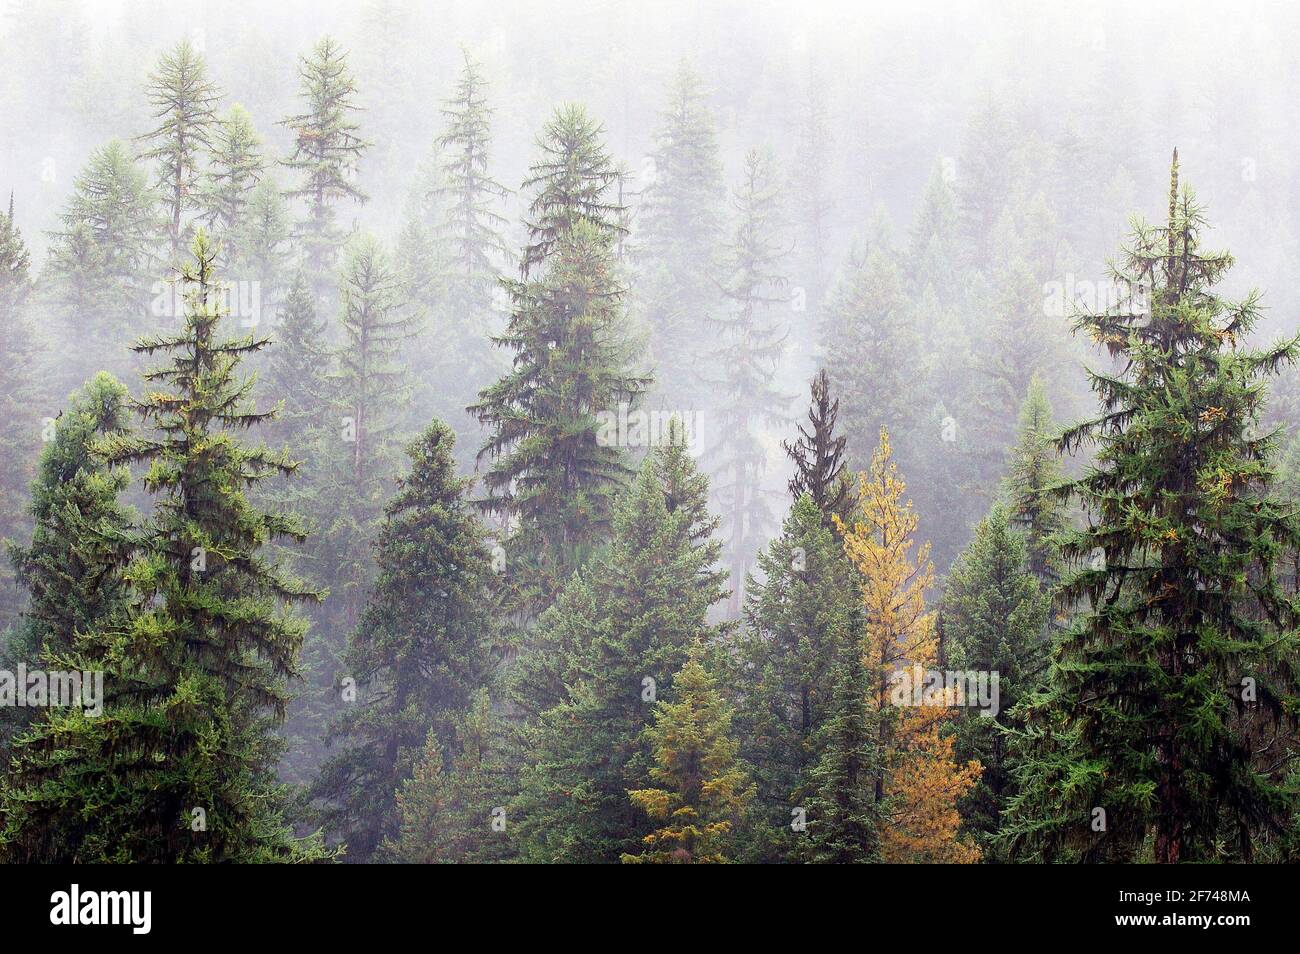 Old-growth western larch forest during rainstorm. Kootenai National Forest in the Purcell Mountains, northwest Montana. (Photo by Randy Beacham) Stock Photo